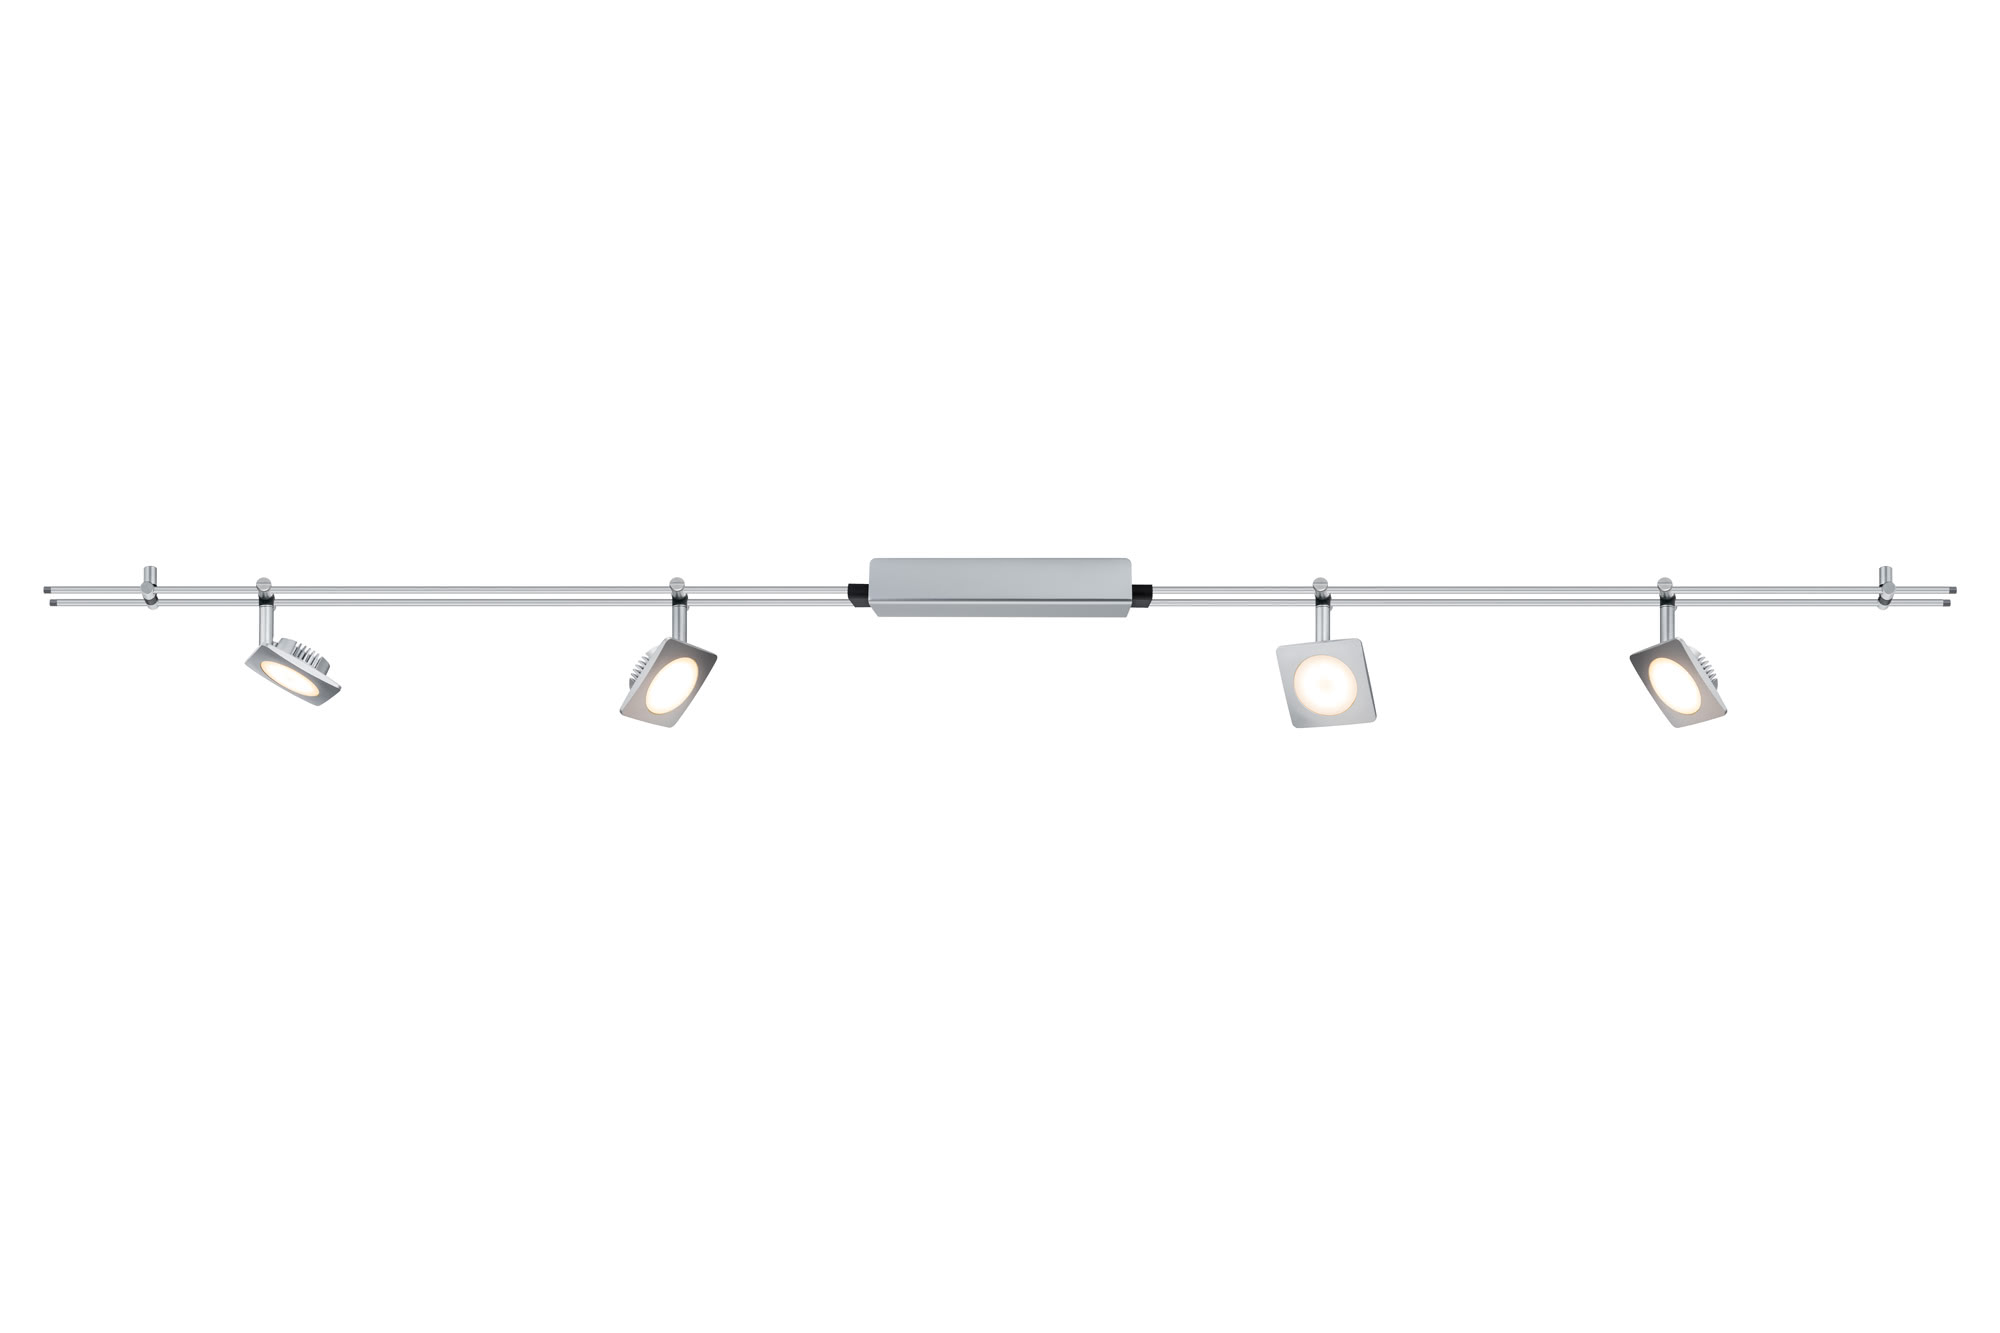 95192 RS DC Set QuadLED 4x4W Chr-m 30VA QuadLED, the 4-lamp LED 12В volt rail system with a total output of 16В W convinces with its energy-saving 12В volt technology. The brilliant light creates a pleasant atmosphere in any living area. The system is suitable for wall and ceiling mounting. 951.92 Paulmann